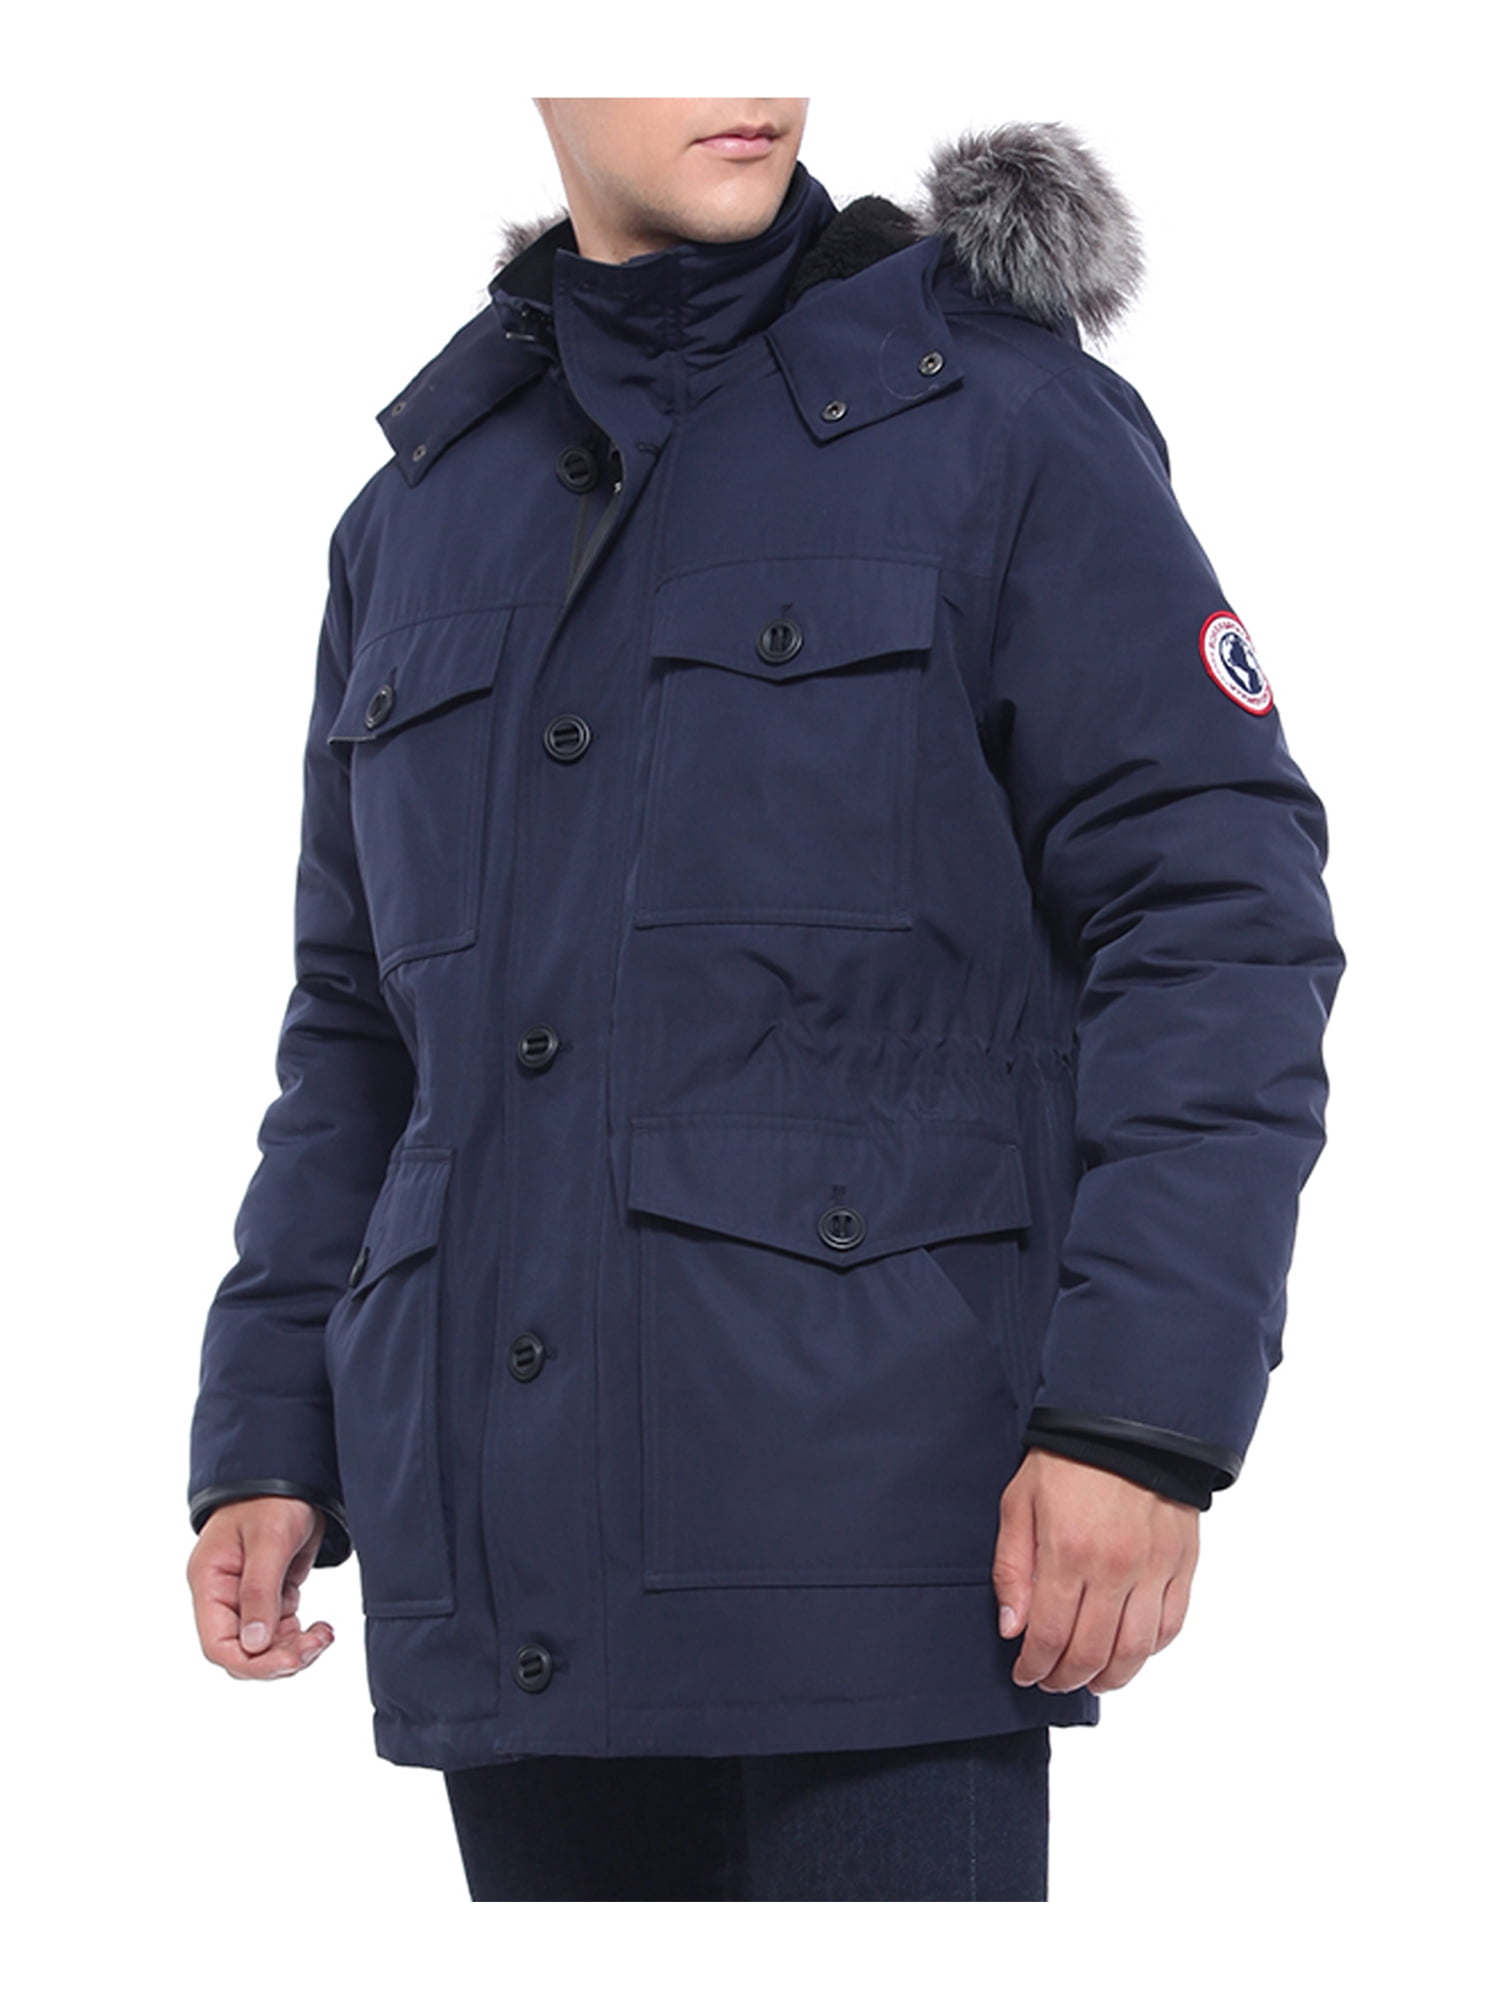 JSY Mens Quilted Outside Faux Fur Hooded Vogue Parkas Down Jacket 